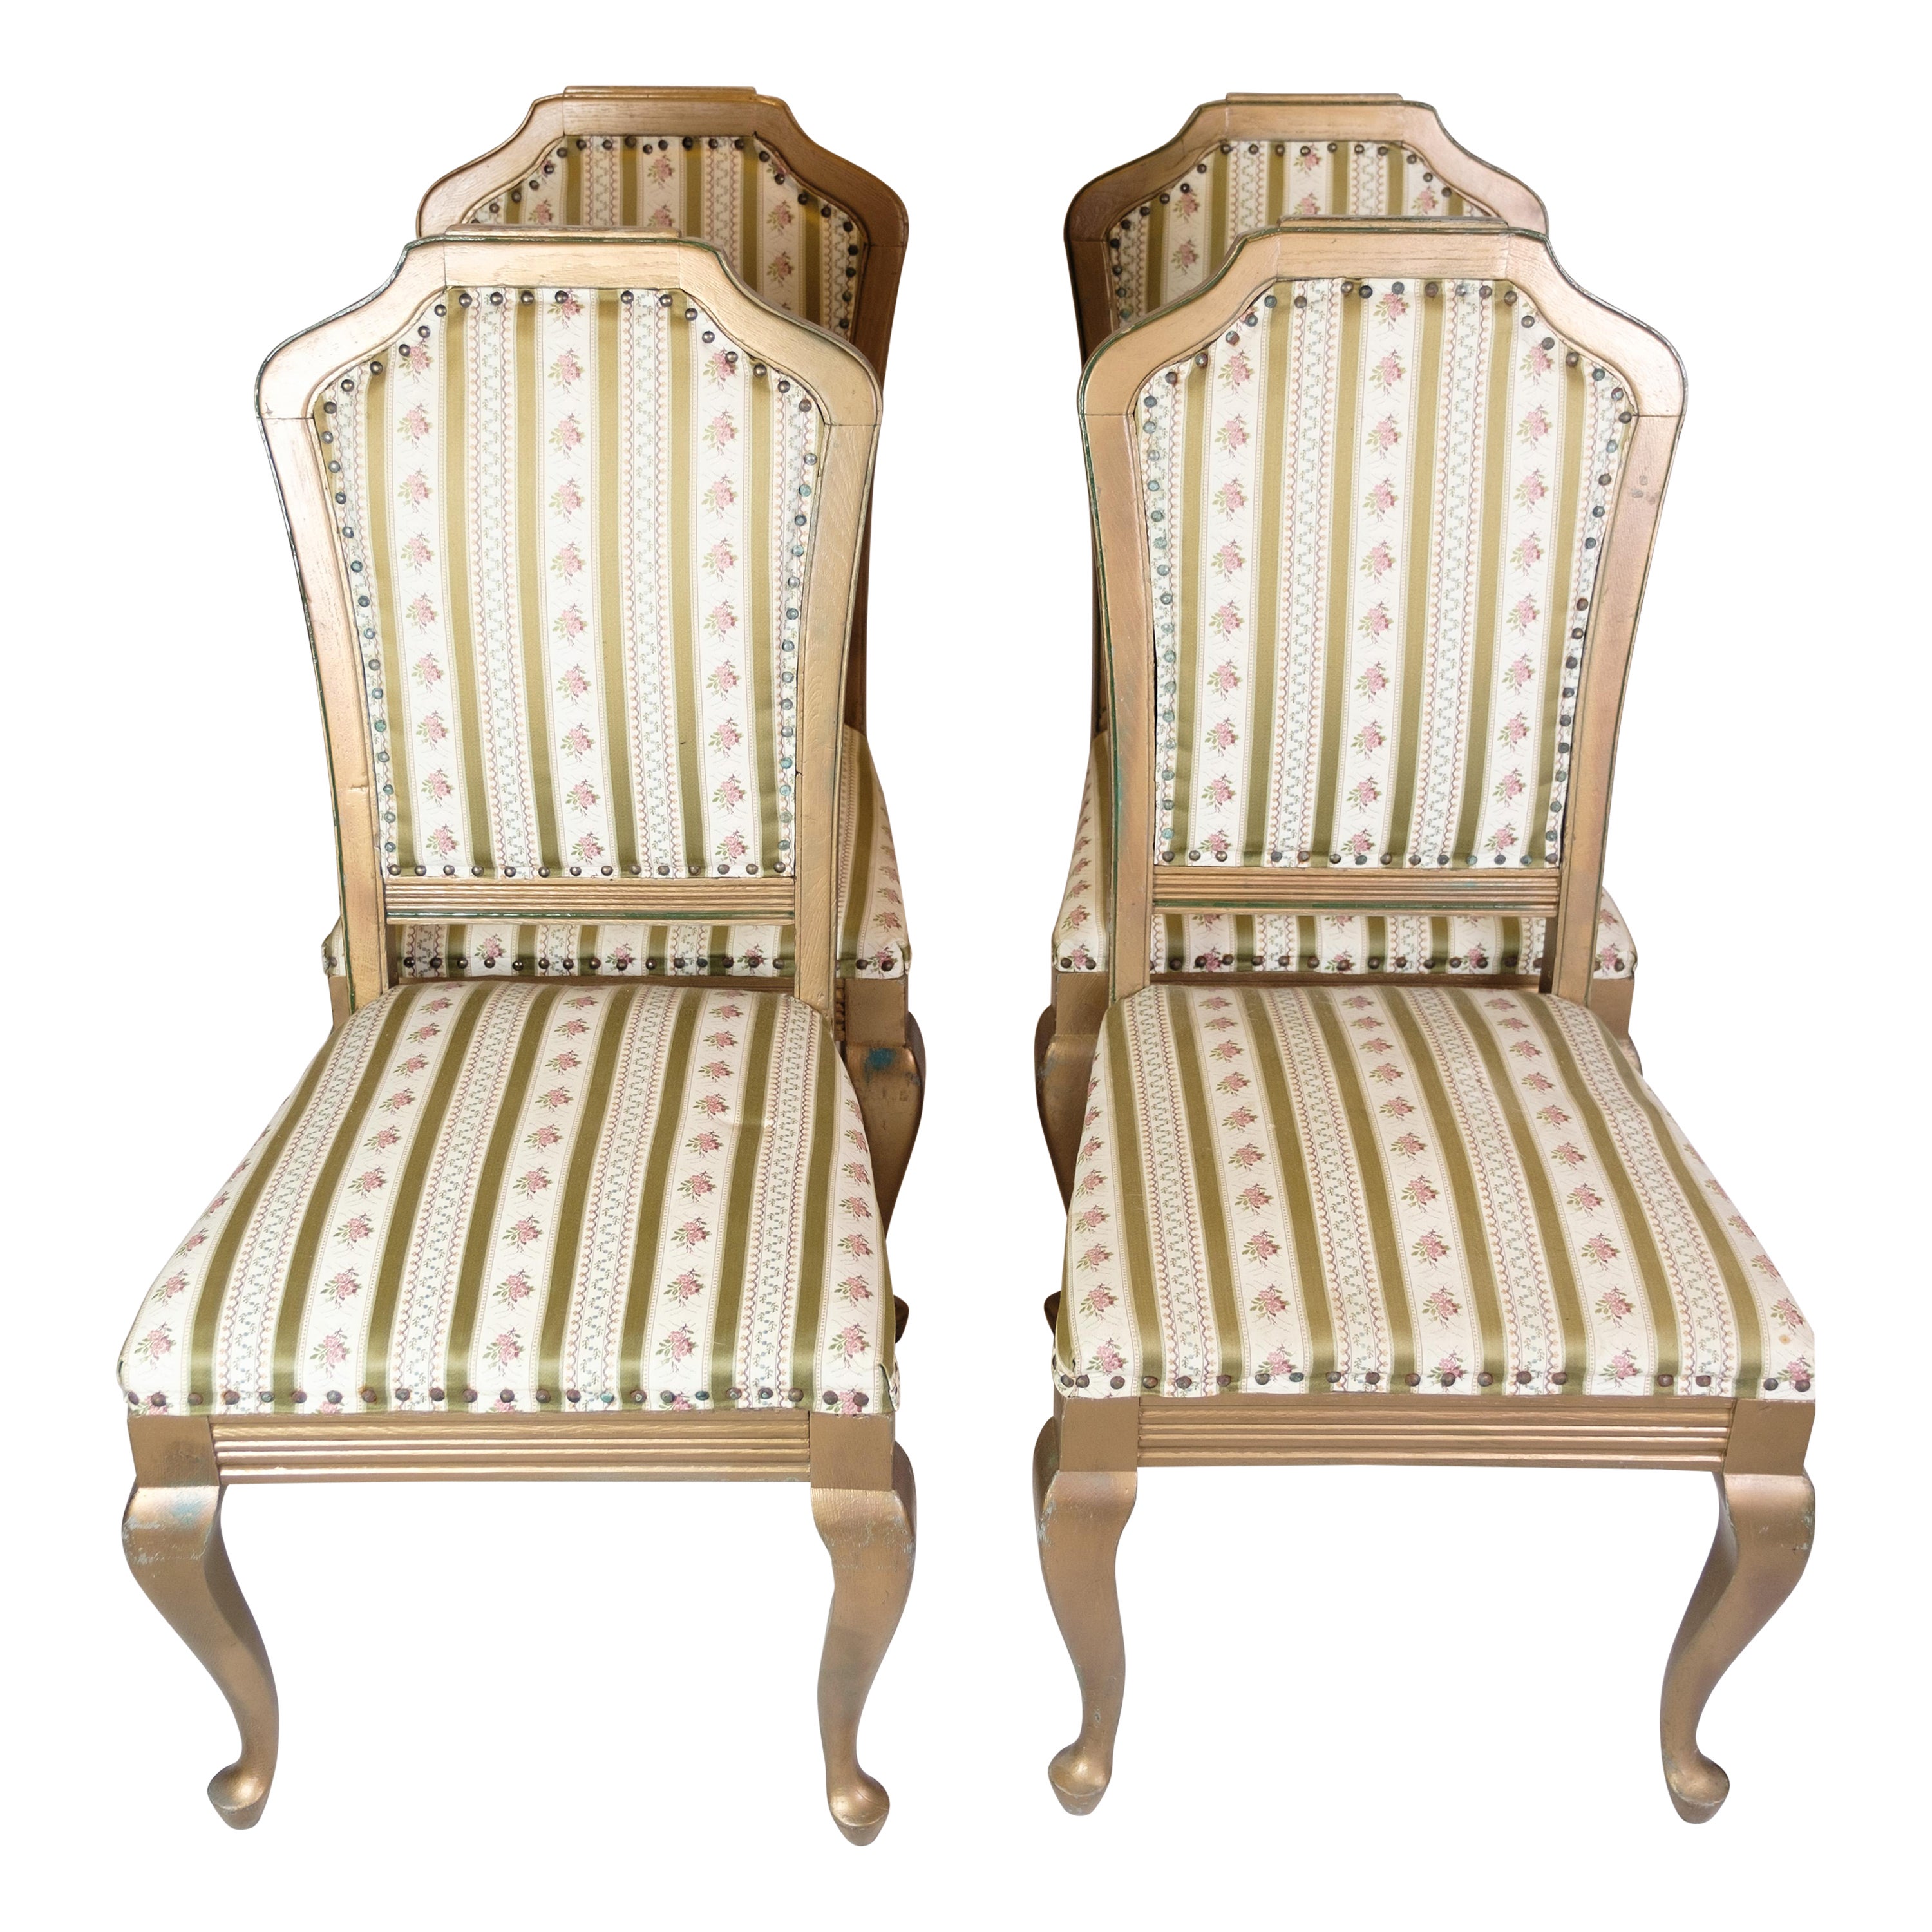 Four Rococo chairs in Glit wood with striped fabric from the 1930s